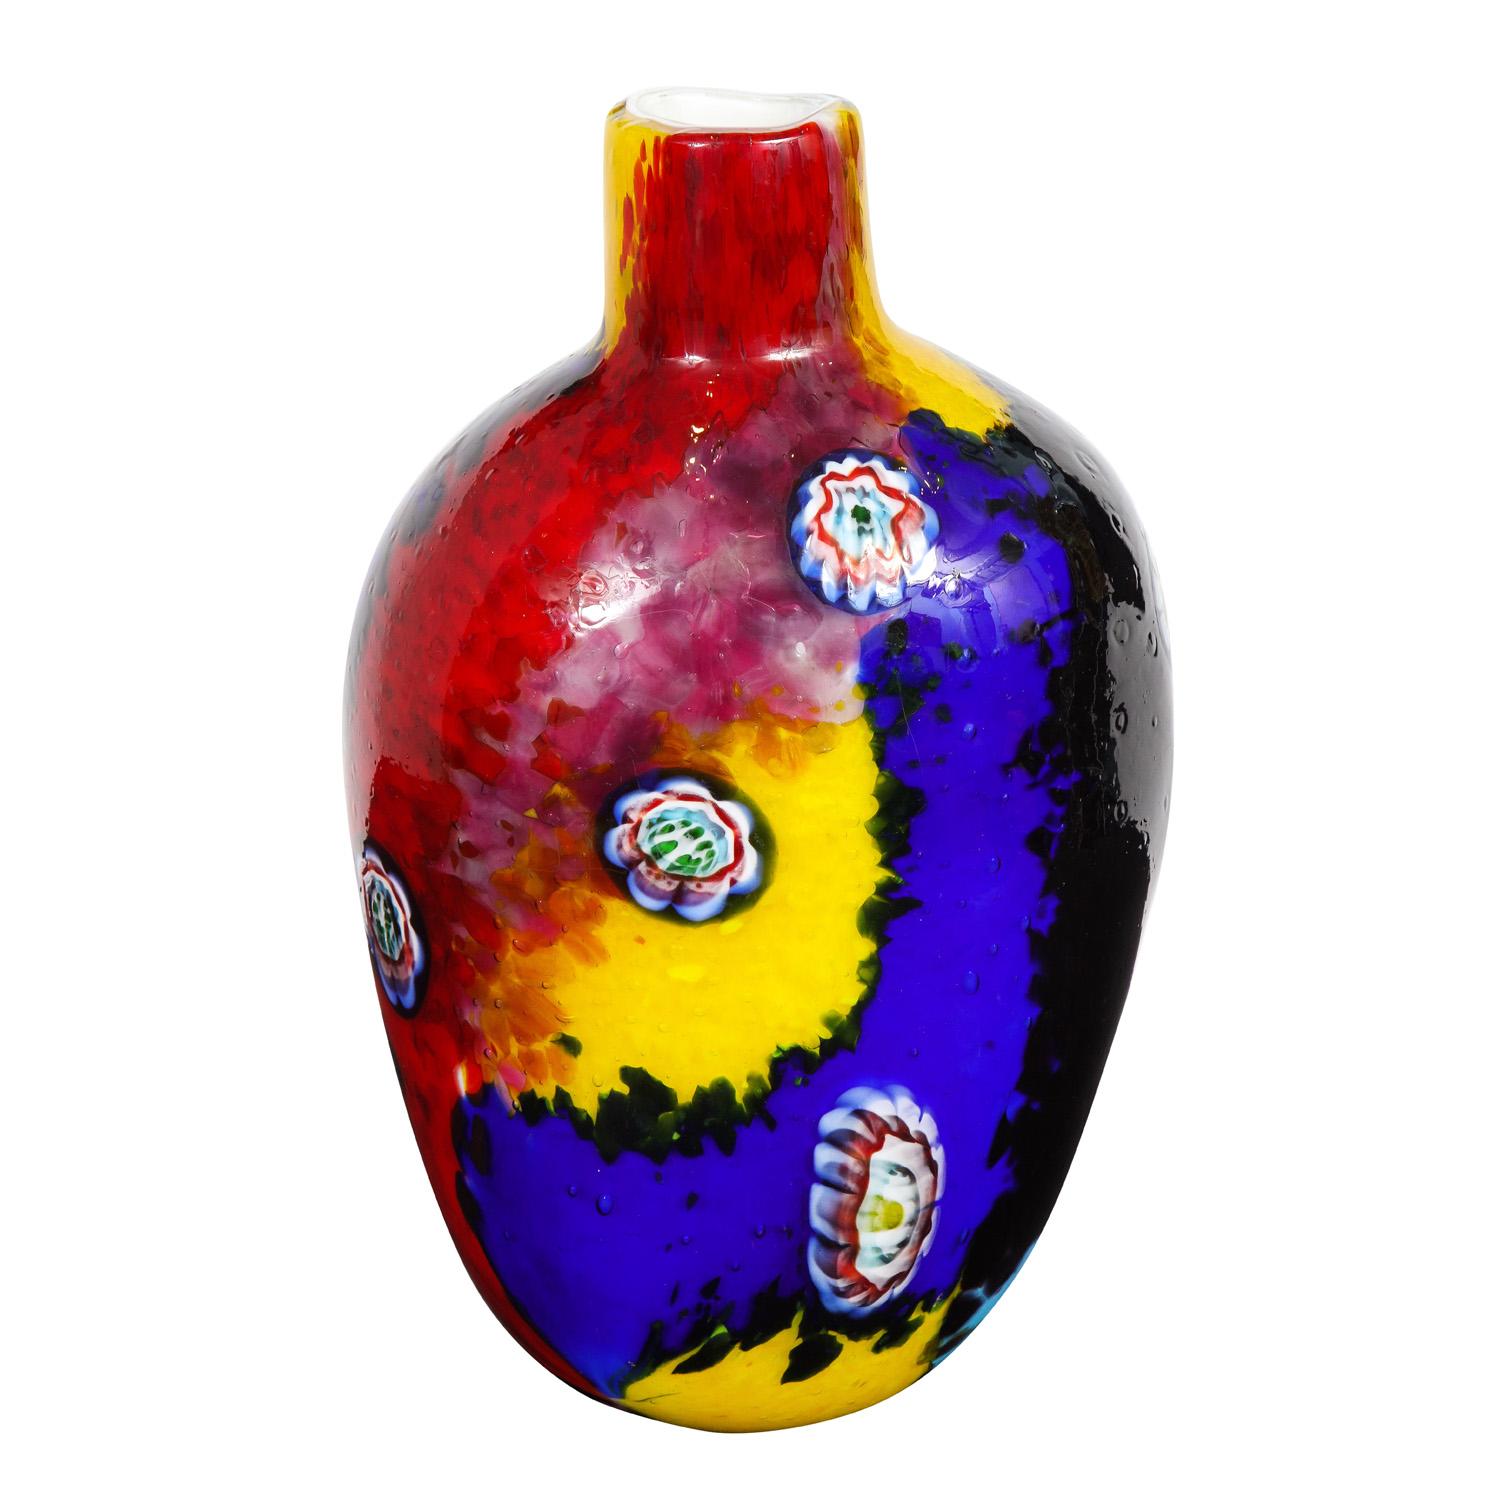 Mid-Century Modern Colorful Handblown Glass Vase by A.V.E.M. 1960s For Sale